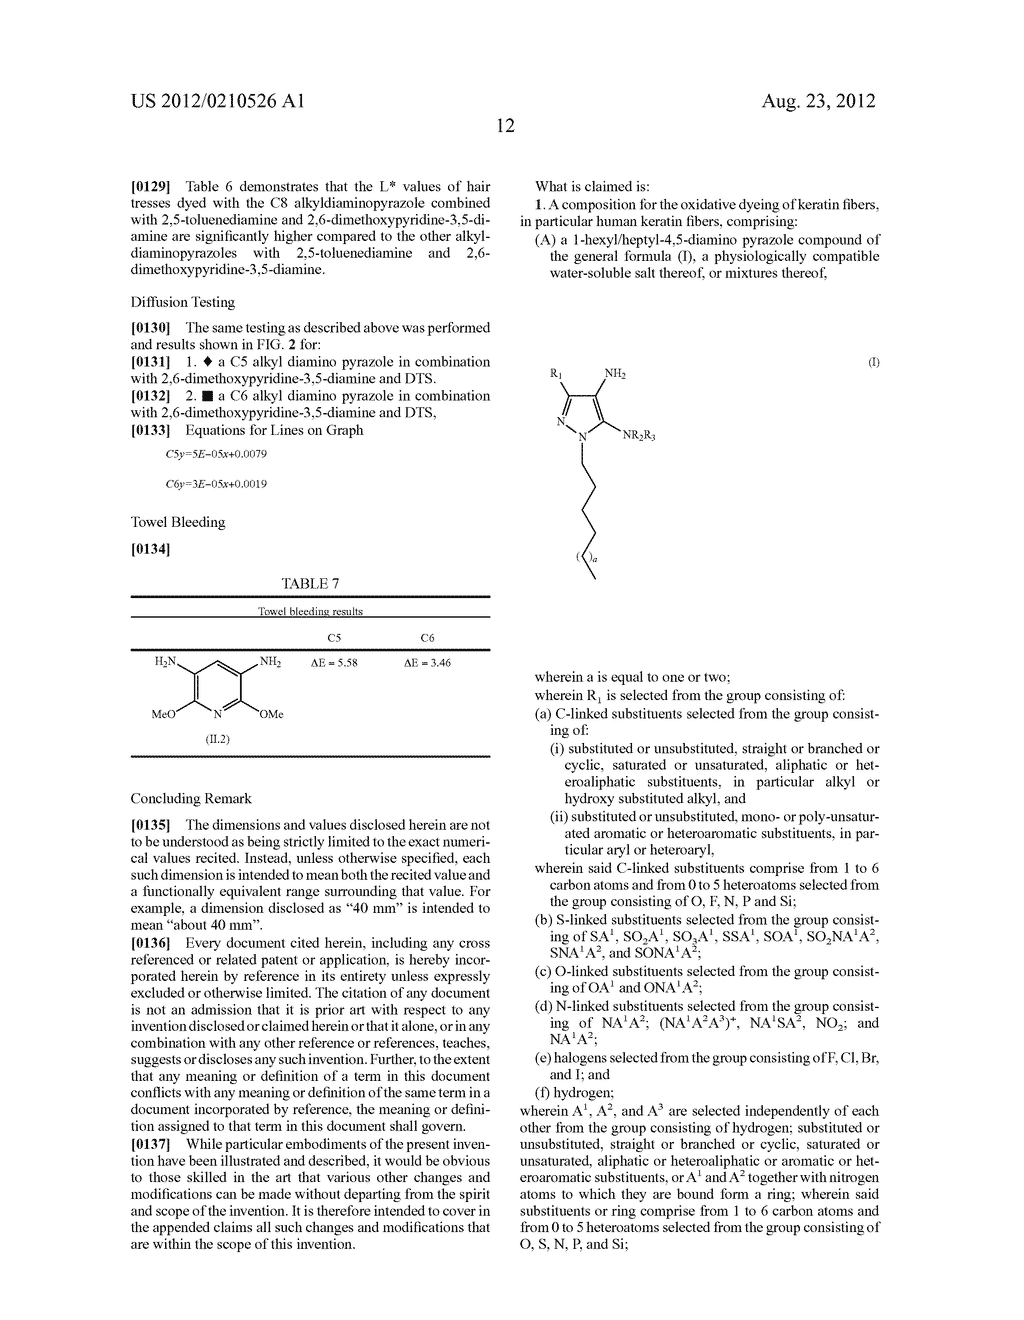 Oxidative Dyeing Compositions Comprising an     1-Hexyl/Heptyl-4,5-diaminopyrazole and a Pyridine and Derivatives Thereof - diagram, schematic, and image 14